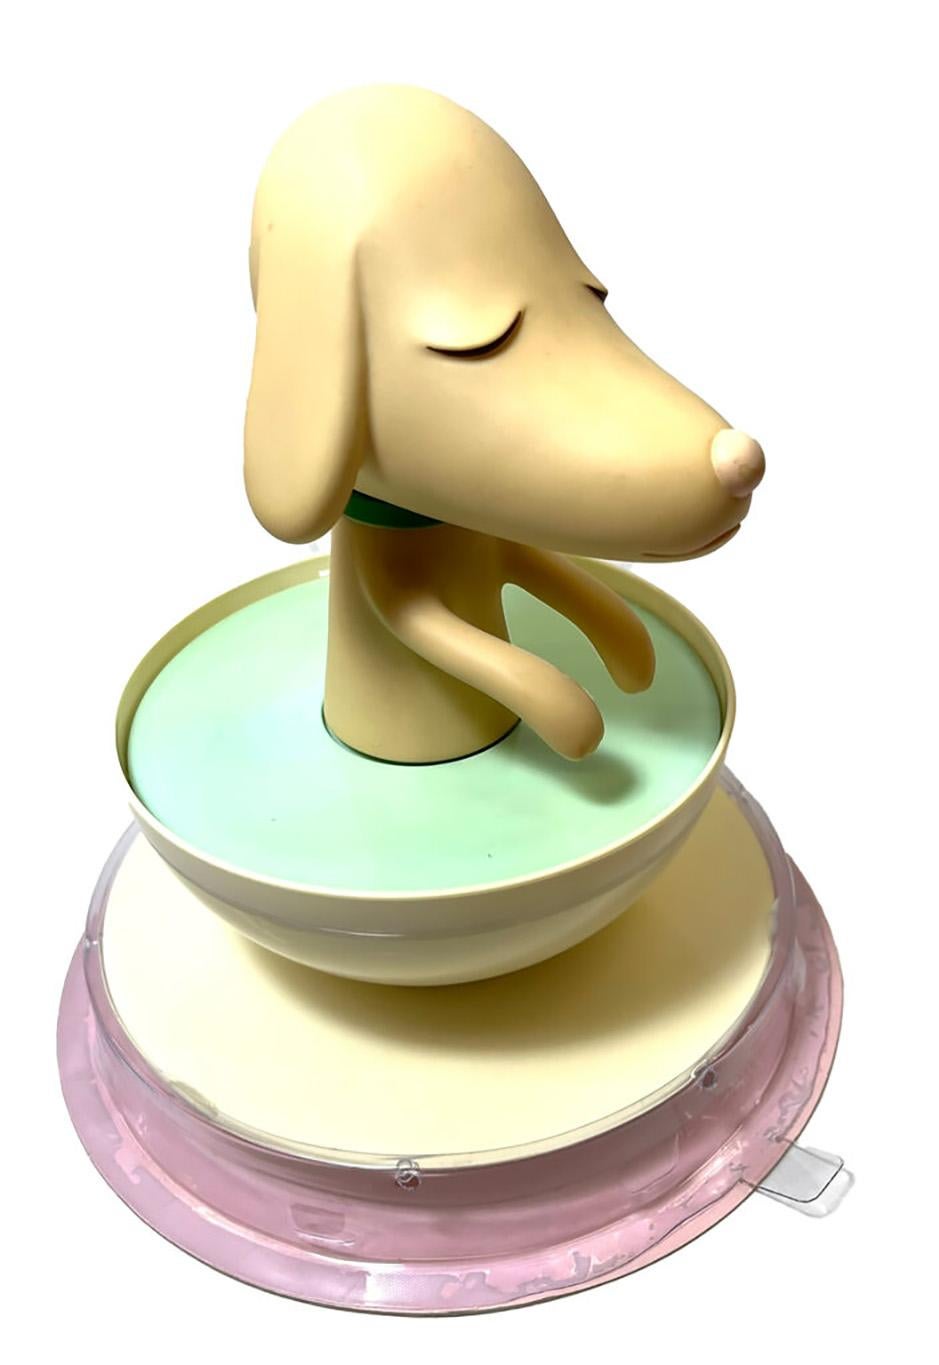 Yoshitomo Nara Pup Cup 2003:
This rare early Yoshitomo Nara Pup Cup art toy features Nara's Lonesome Puppy molded in a cup.  A nicely-sized, highly collectible Nara art toy sure to standout in any setting. 

Medium: Vinyl art toy. Year: